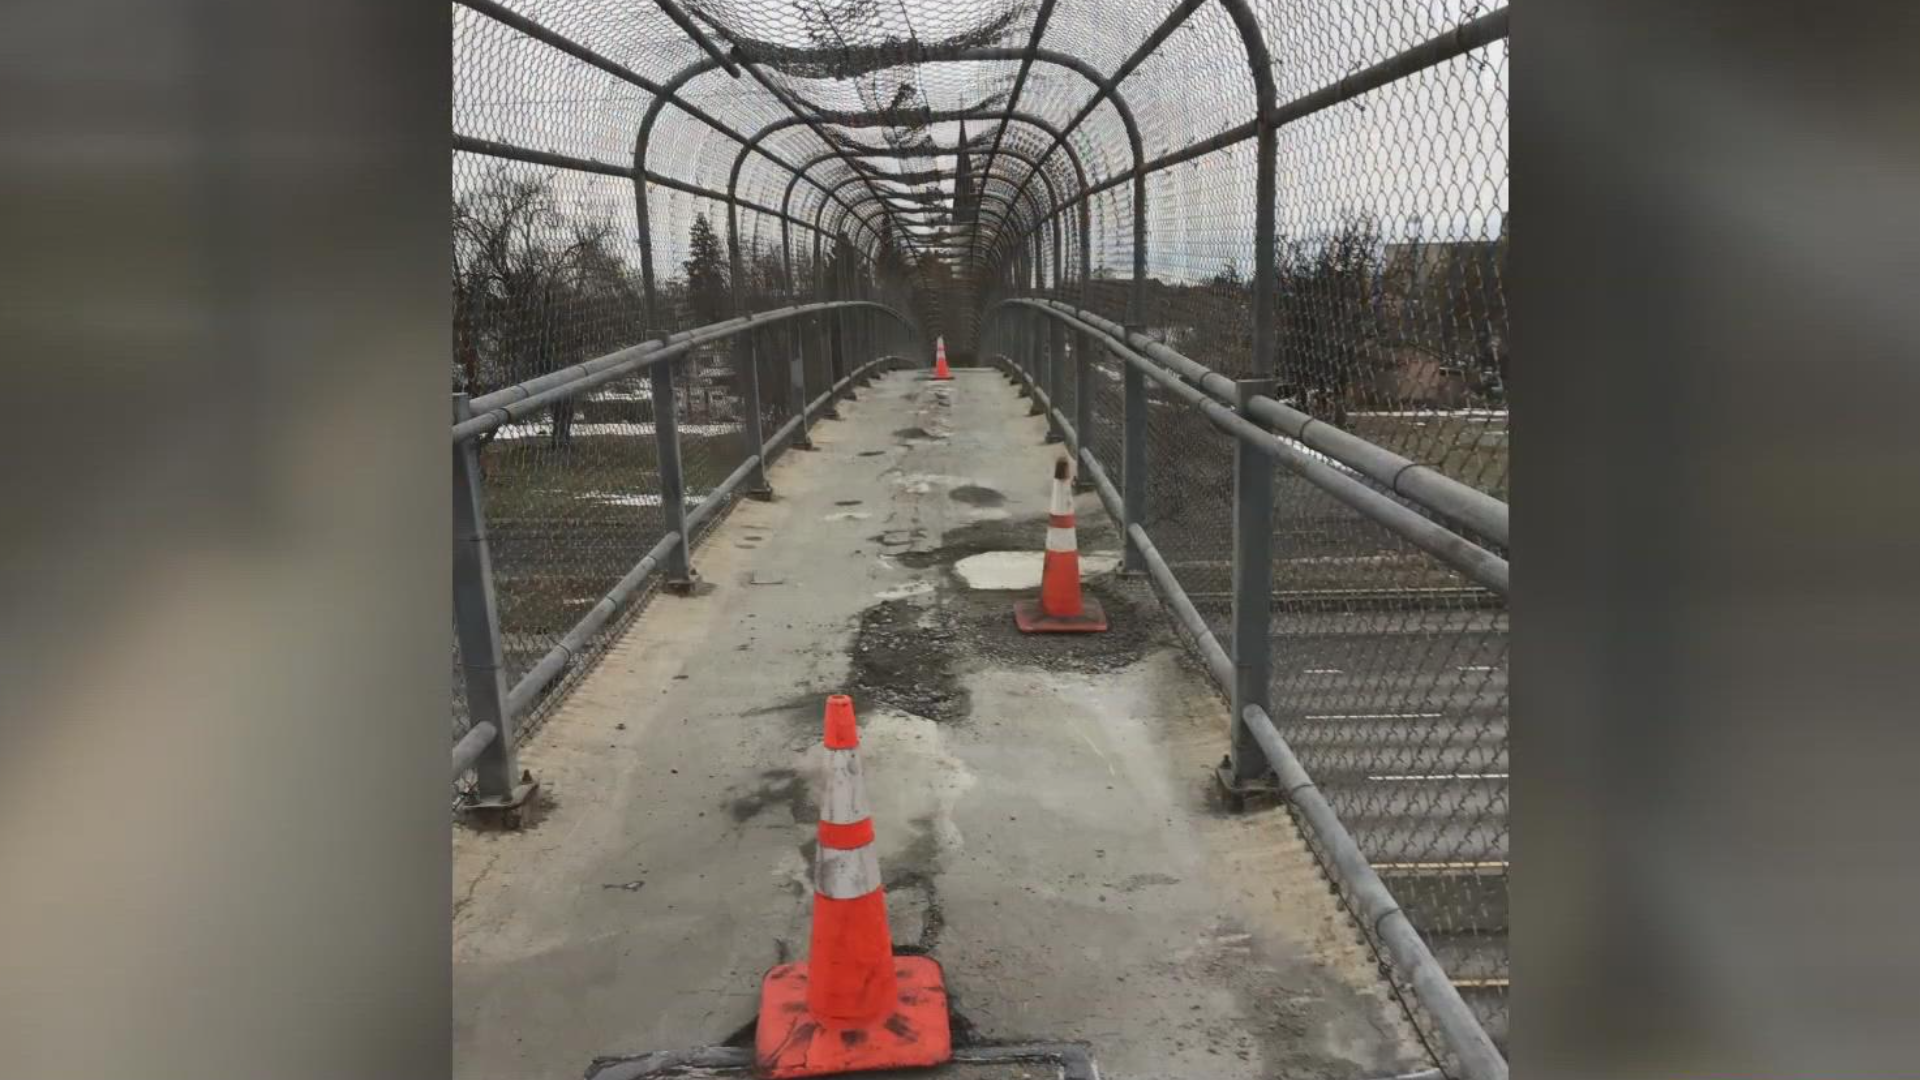 The Magnolia Street Pedestrian Bridge over I-90 in Spokane is closing for repairs starting today.